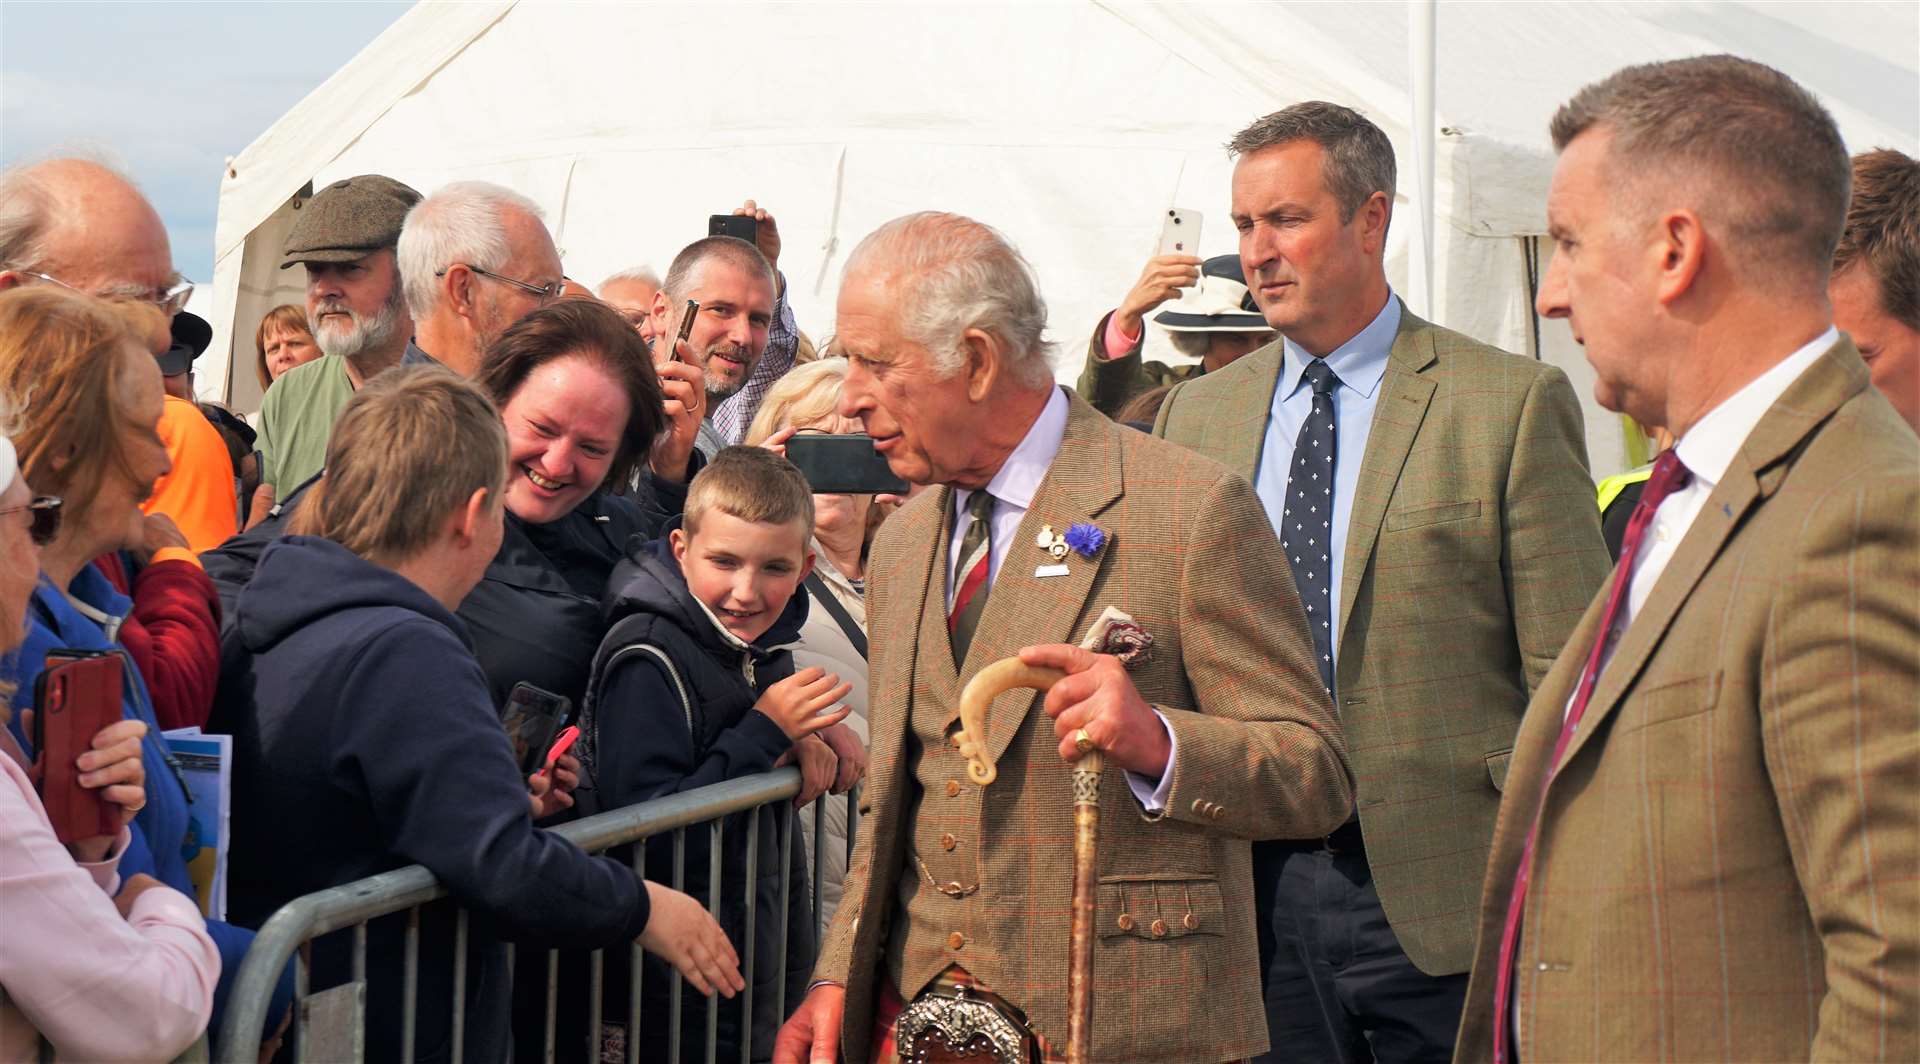 The King meets members of the public during a brief walkabout. Anna Polson from Lybster said her children were delighted to shake his hand. Picture: DGS